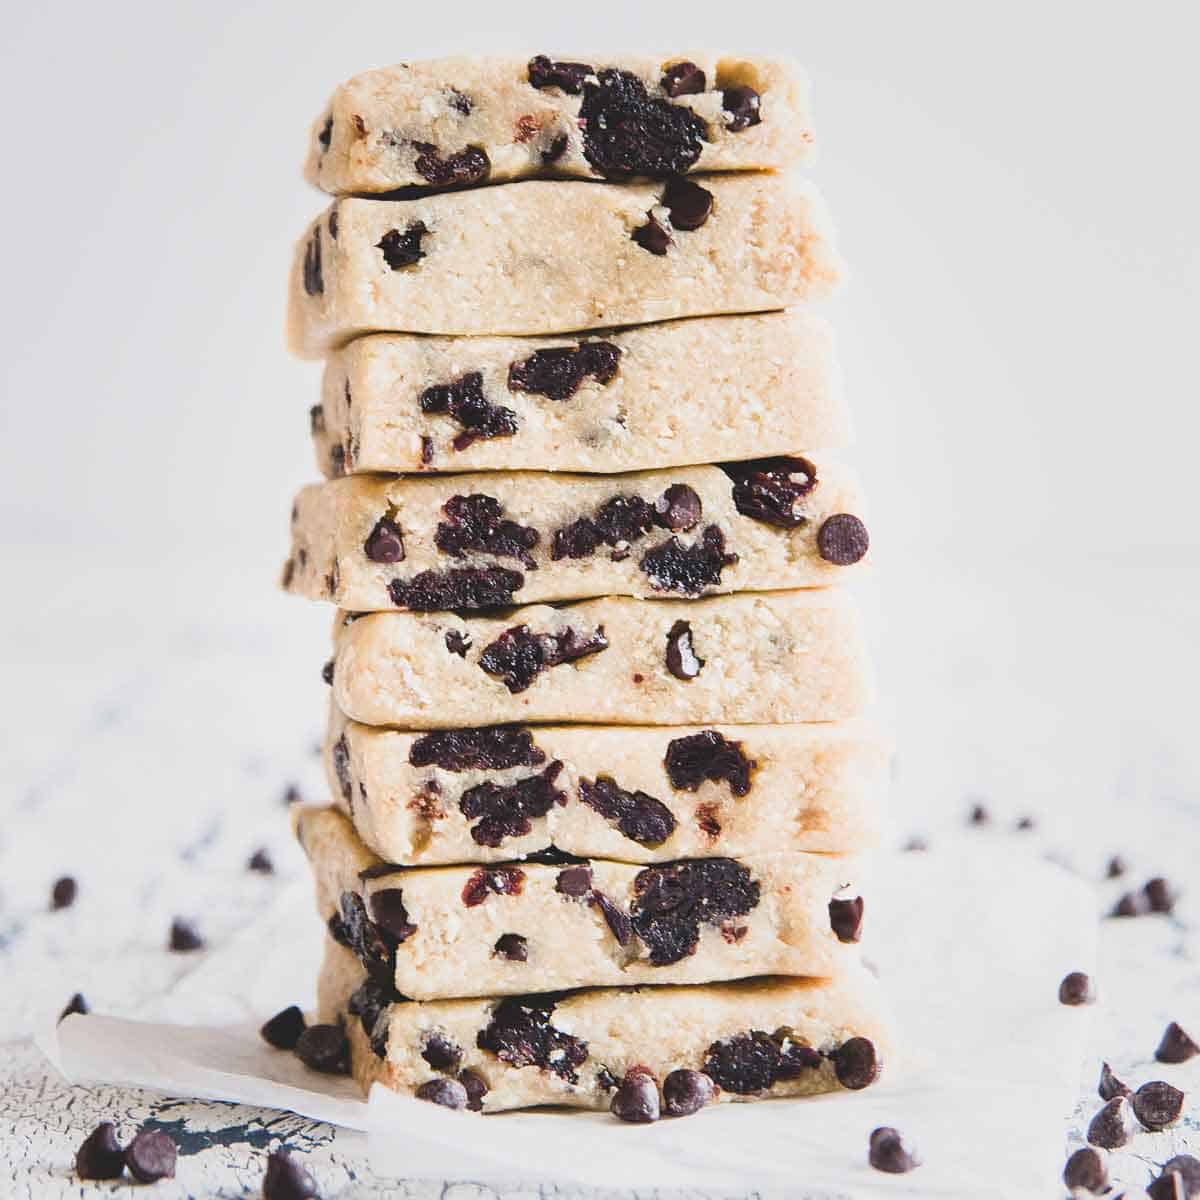 These no bake cookie dough bars are packed with chocolate chips and dried Montmorency tart cherries. A healthy snack that tastes as decadent as cookie dough!